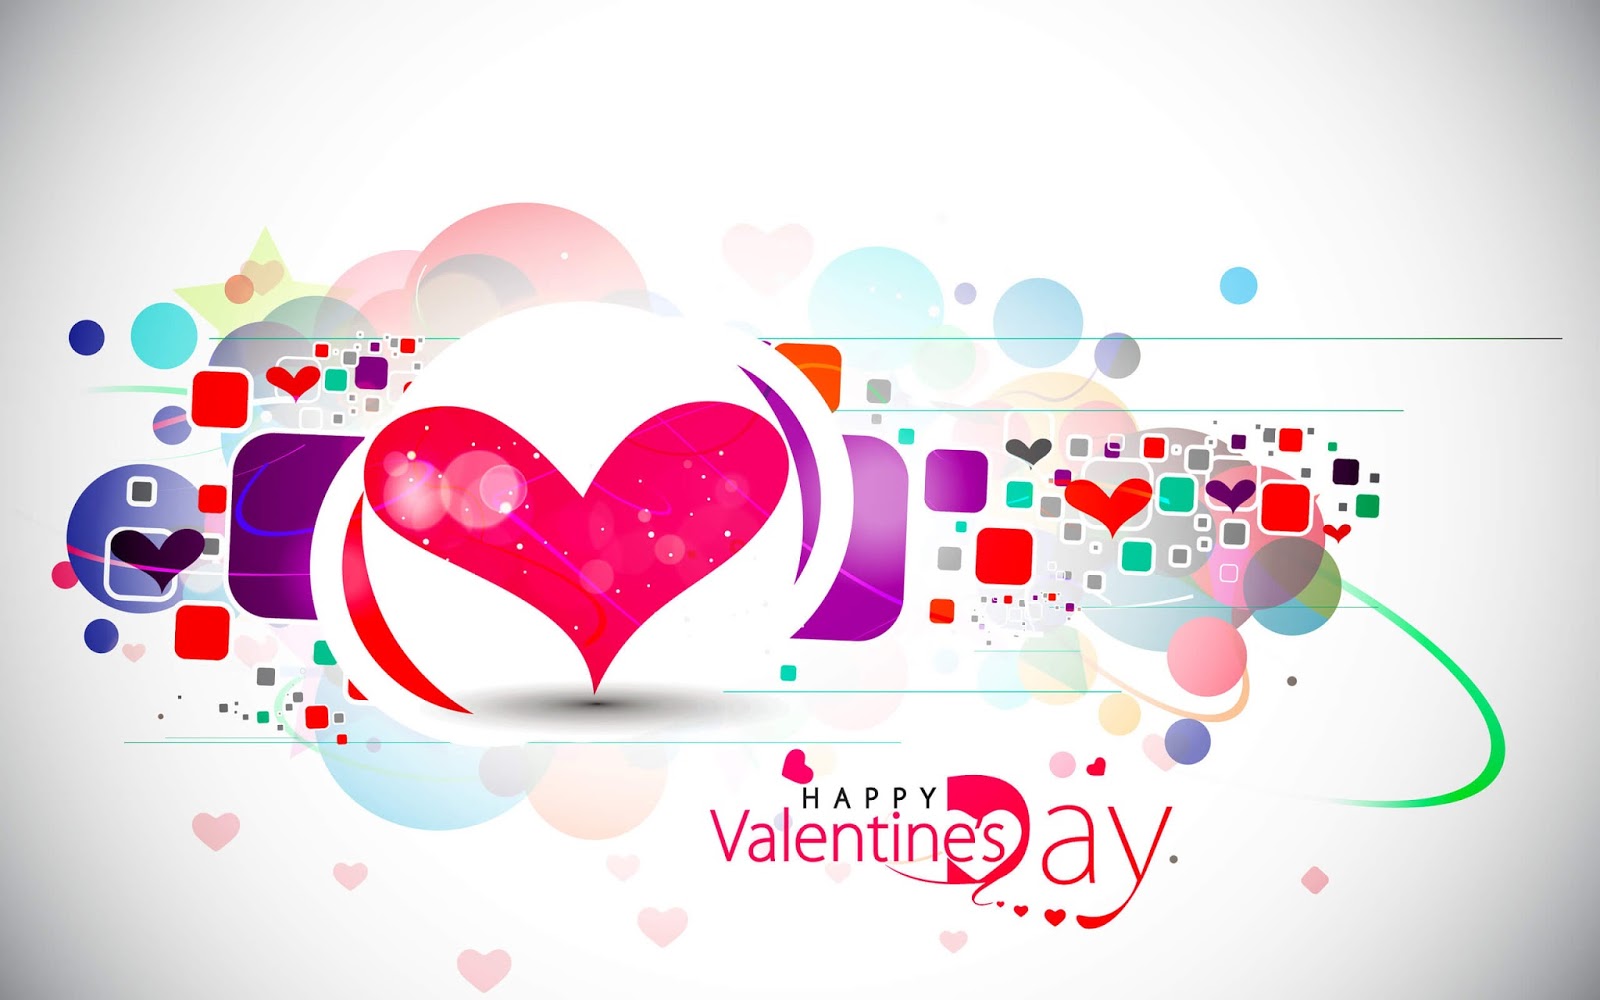 Happy Valentines day Stylish Attractive Wallpaper Image